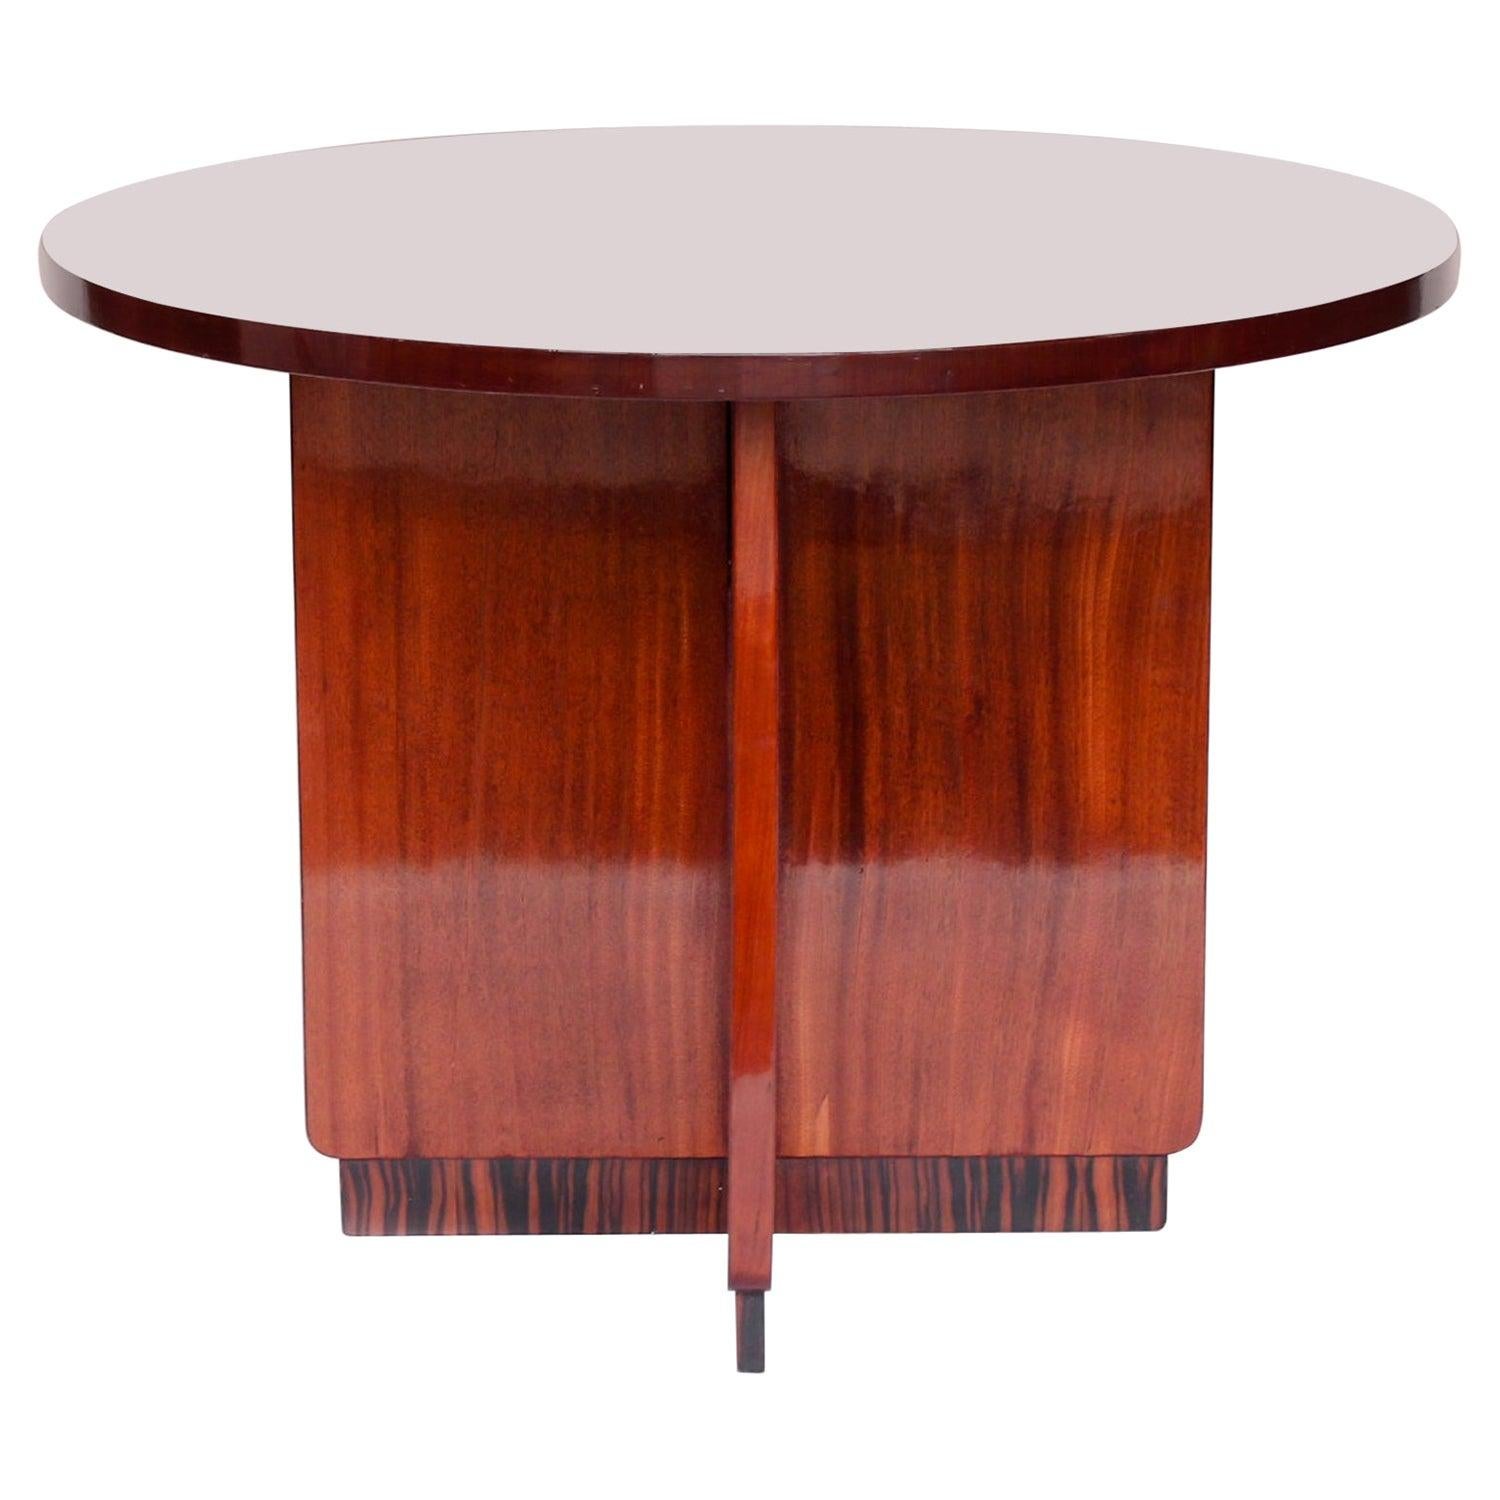 Art Deco Side Table, Walnut and Maccassar Ebony, French, circa 1925 For Sale